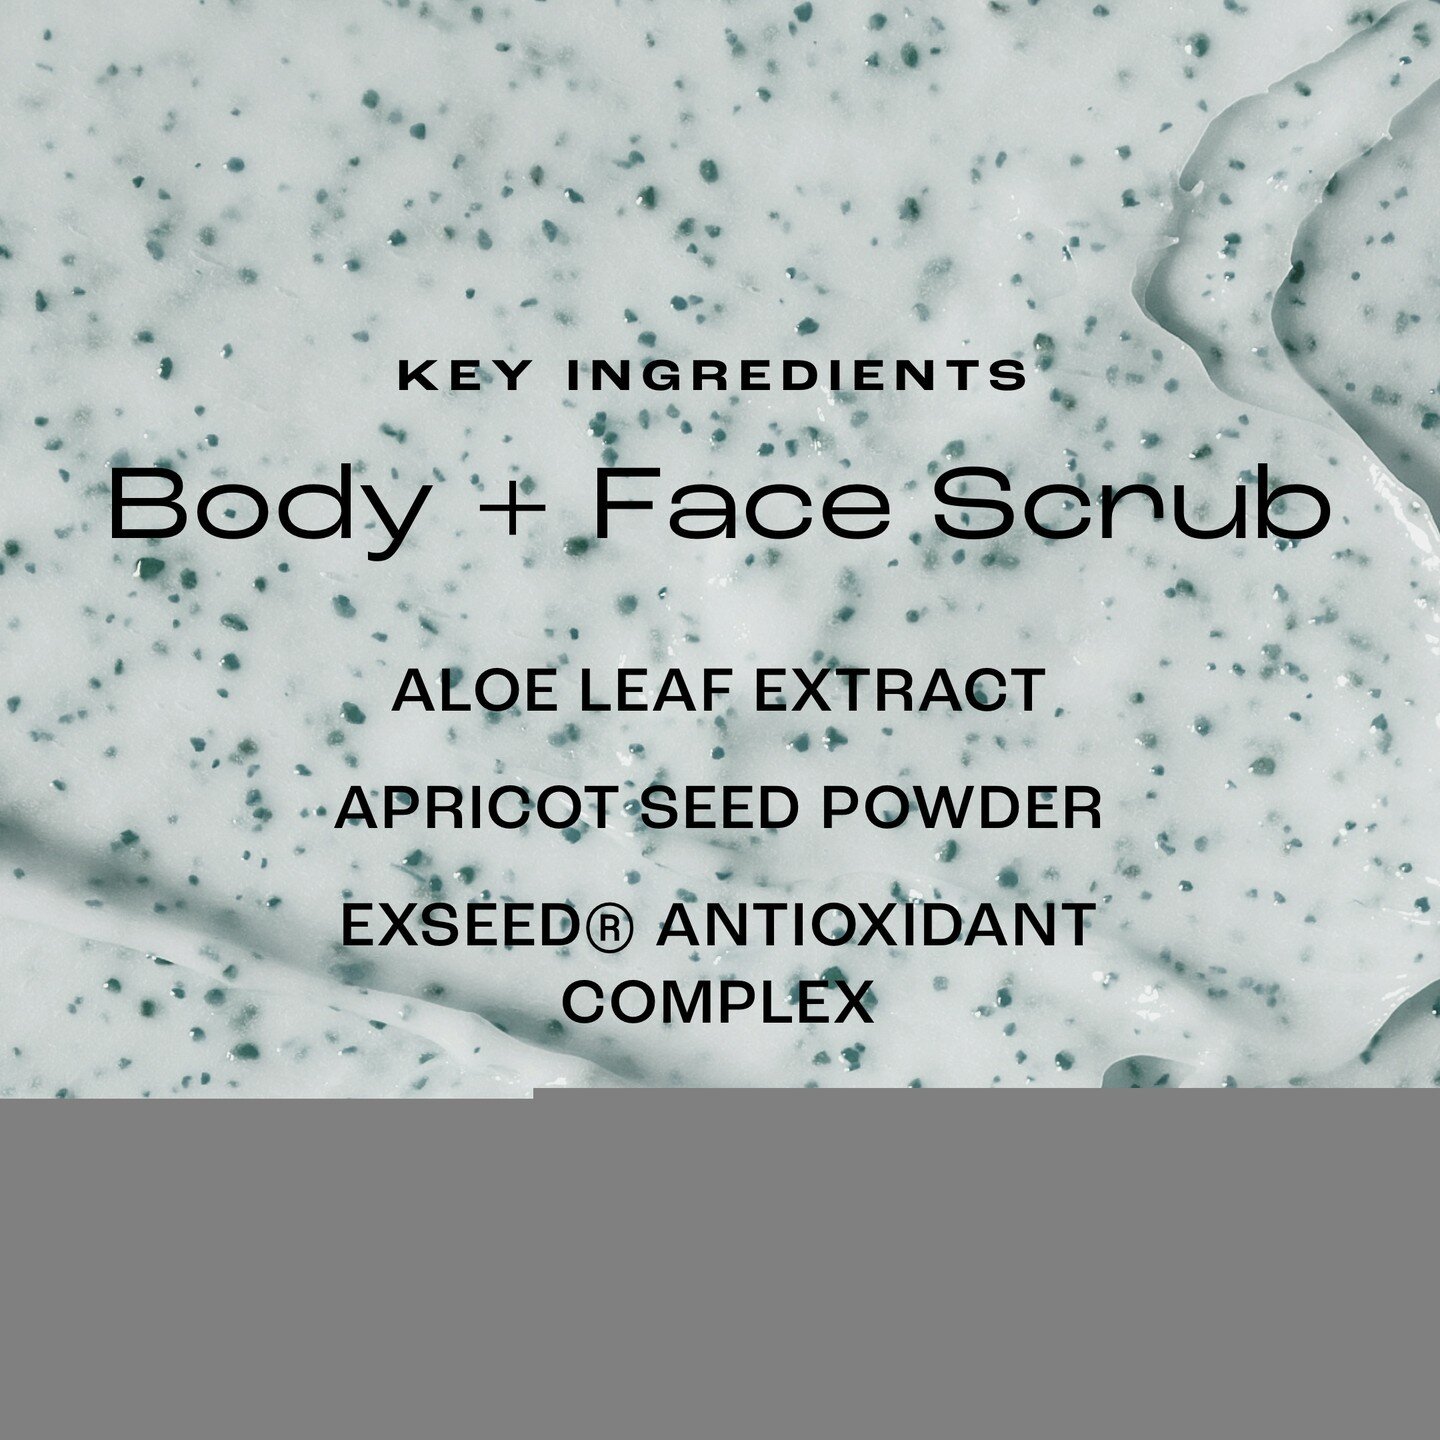 Some of the beneficial, KEY ingredients in our Body + Face Scrub are Aloe Leaf Extract, Apricot Seed Powder and our ExSeed&reg; Antioxidant Complex. ⁠
⁠
Aloe Leaf Extract has antiseptic effects. It contains salicylic acid, which helps prevent + elimi